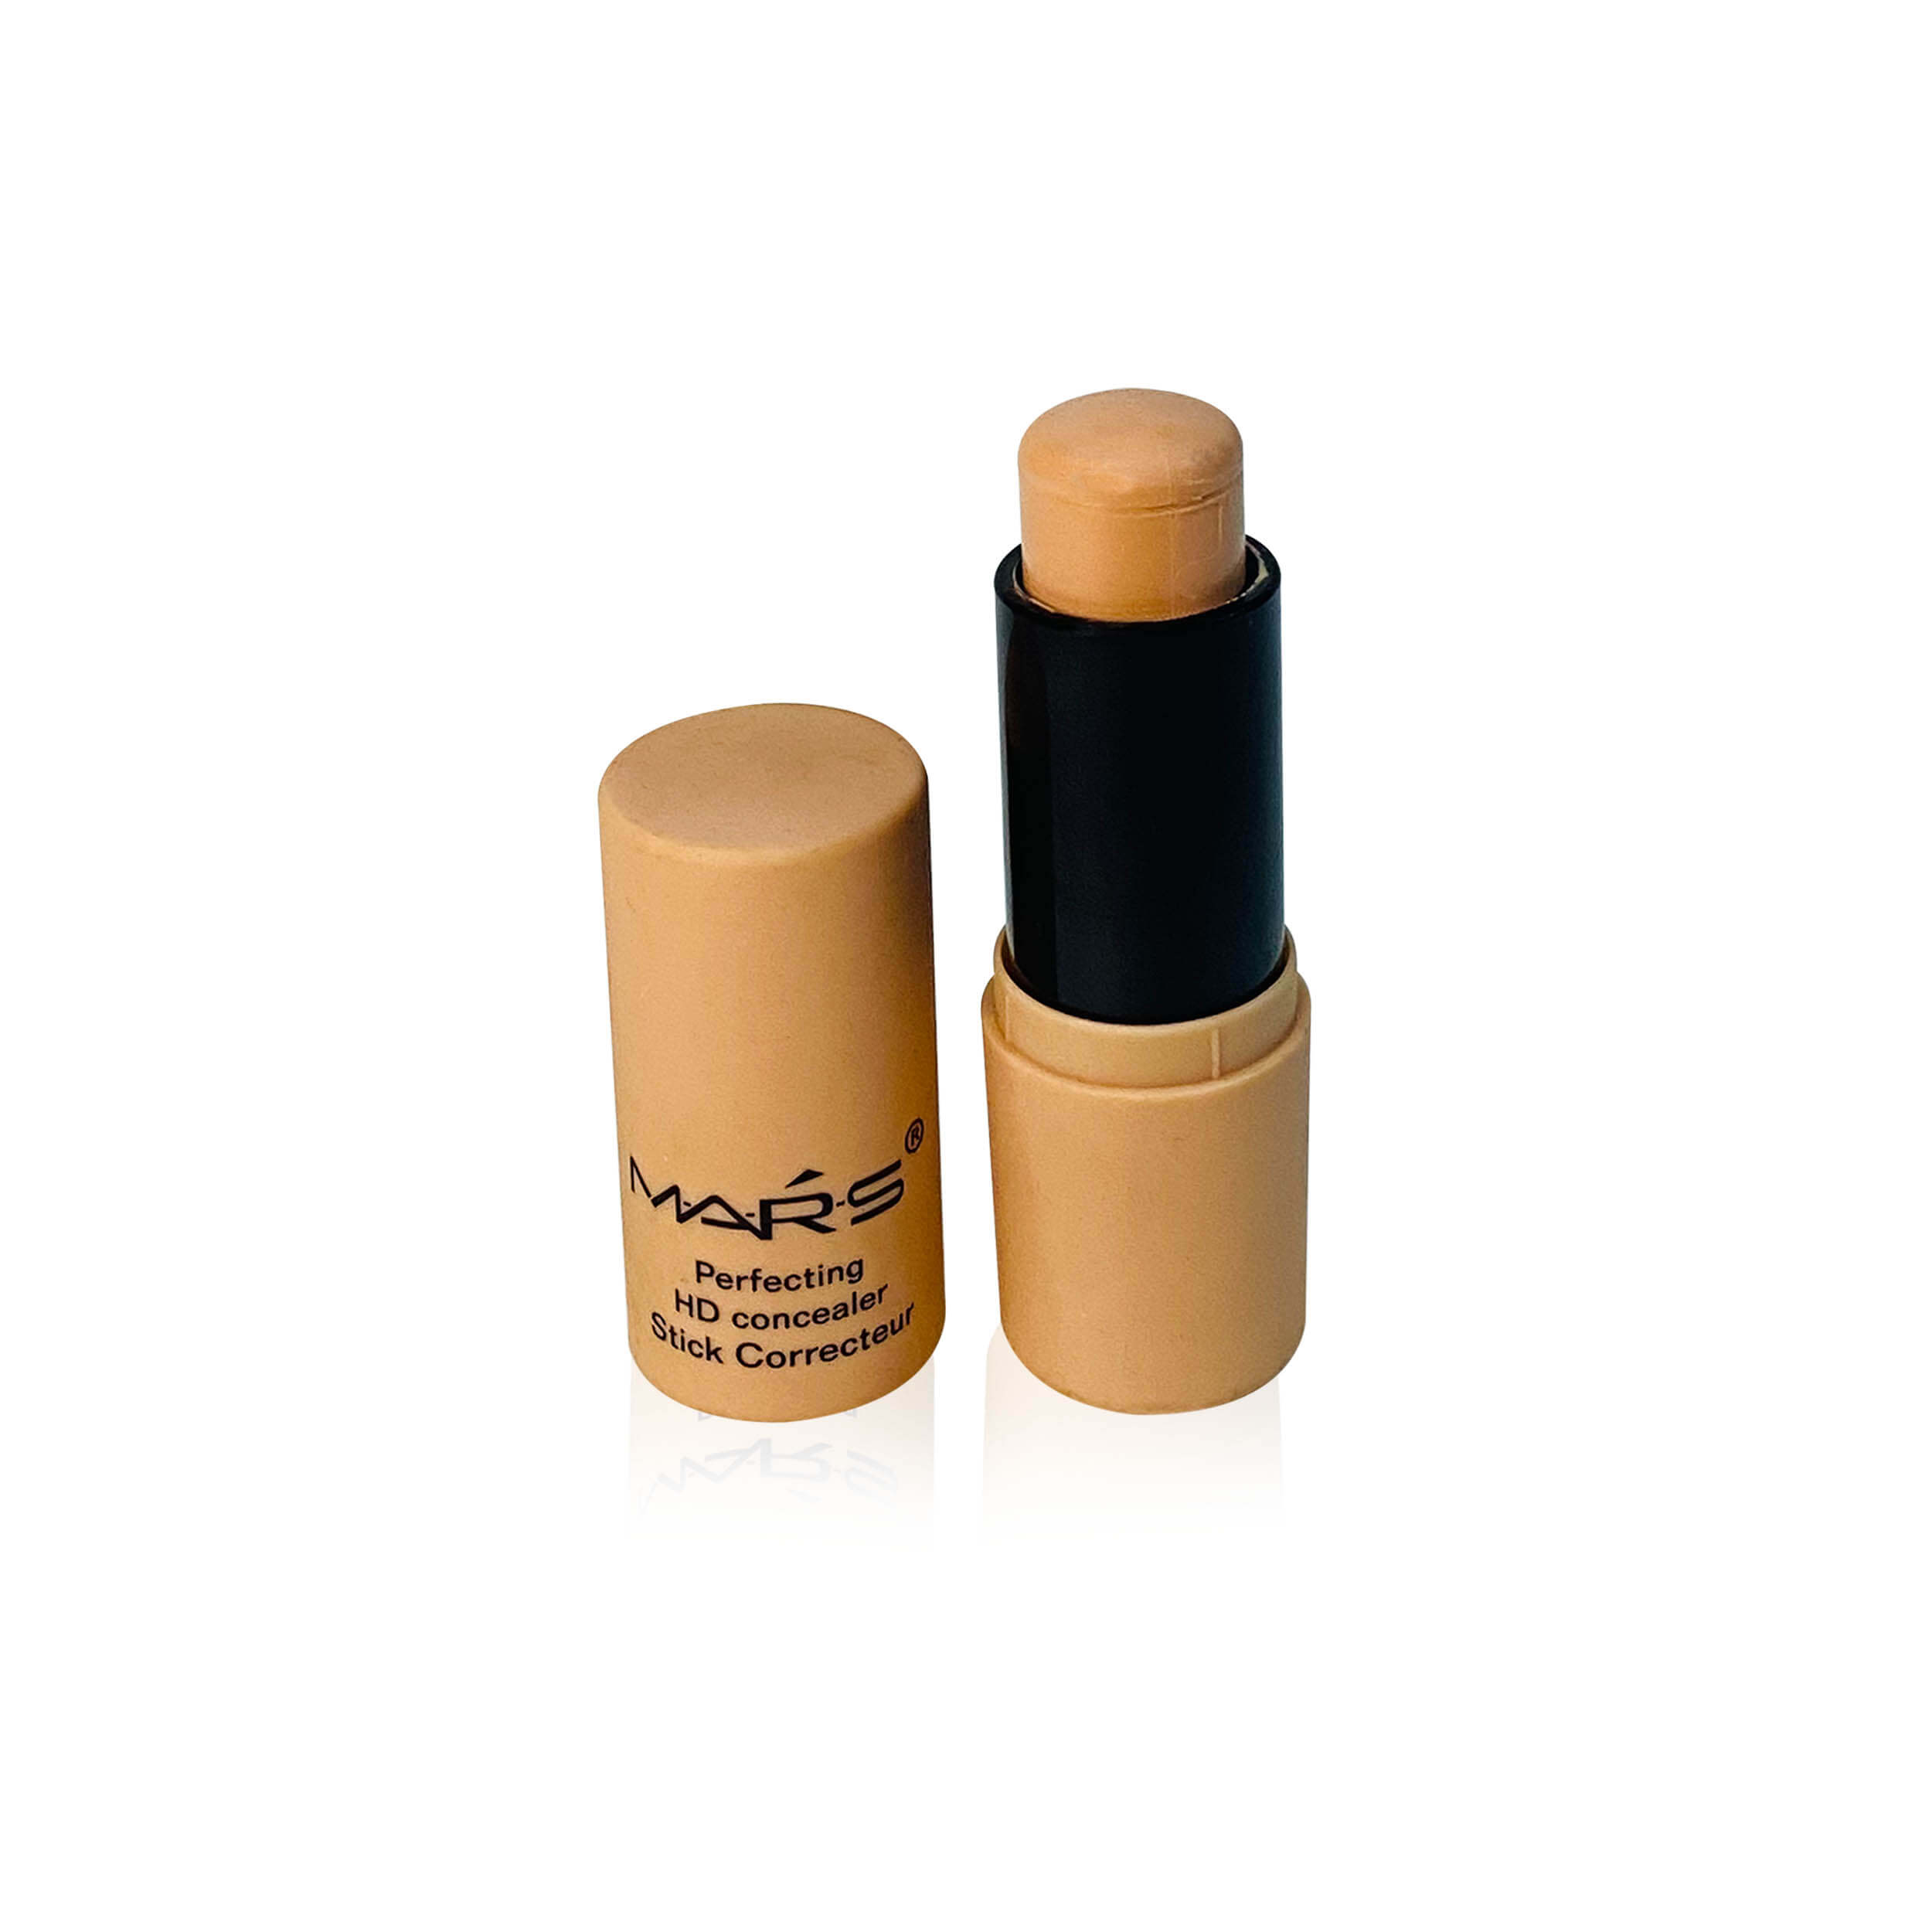 MARS Perfecting HD Concealer Stick Correcteur - 02 | Lightweight | Soft & Smooth Coverage | Oil Control | Long Lasting | Mousse Texture